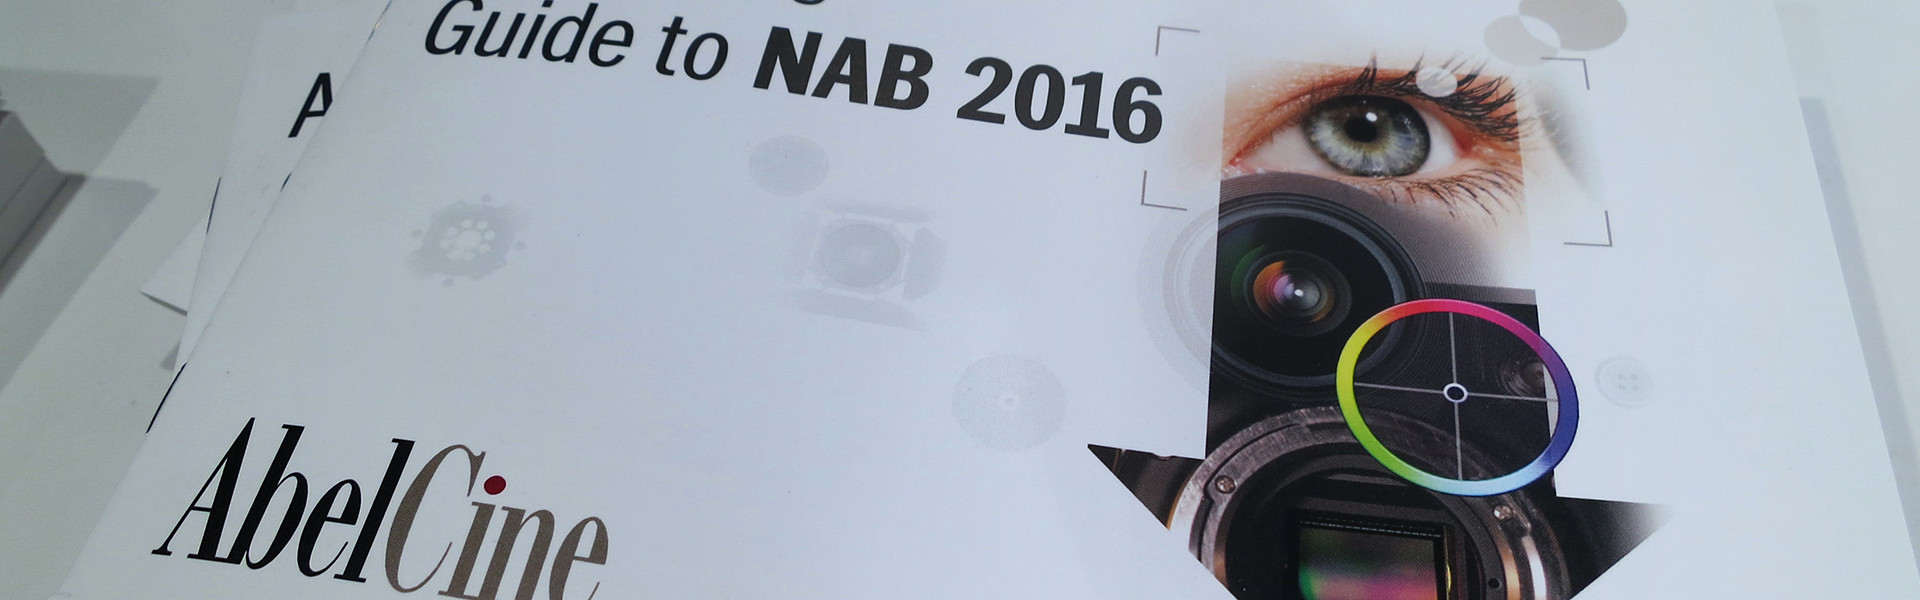 Header image for article NAB 2016 Tech Talks at the AbelCine Booth: Nokia